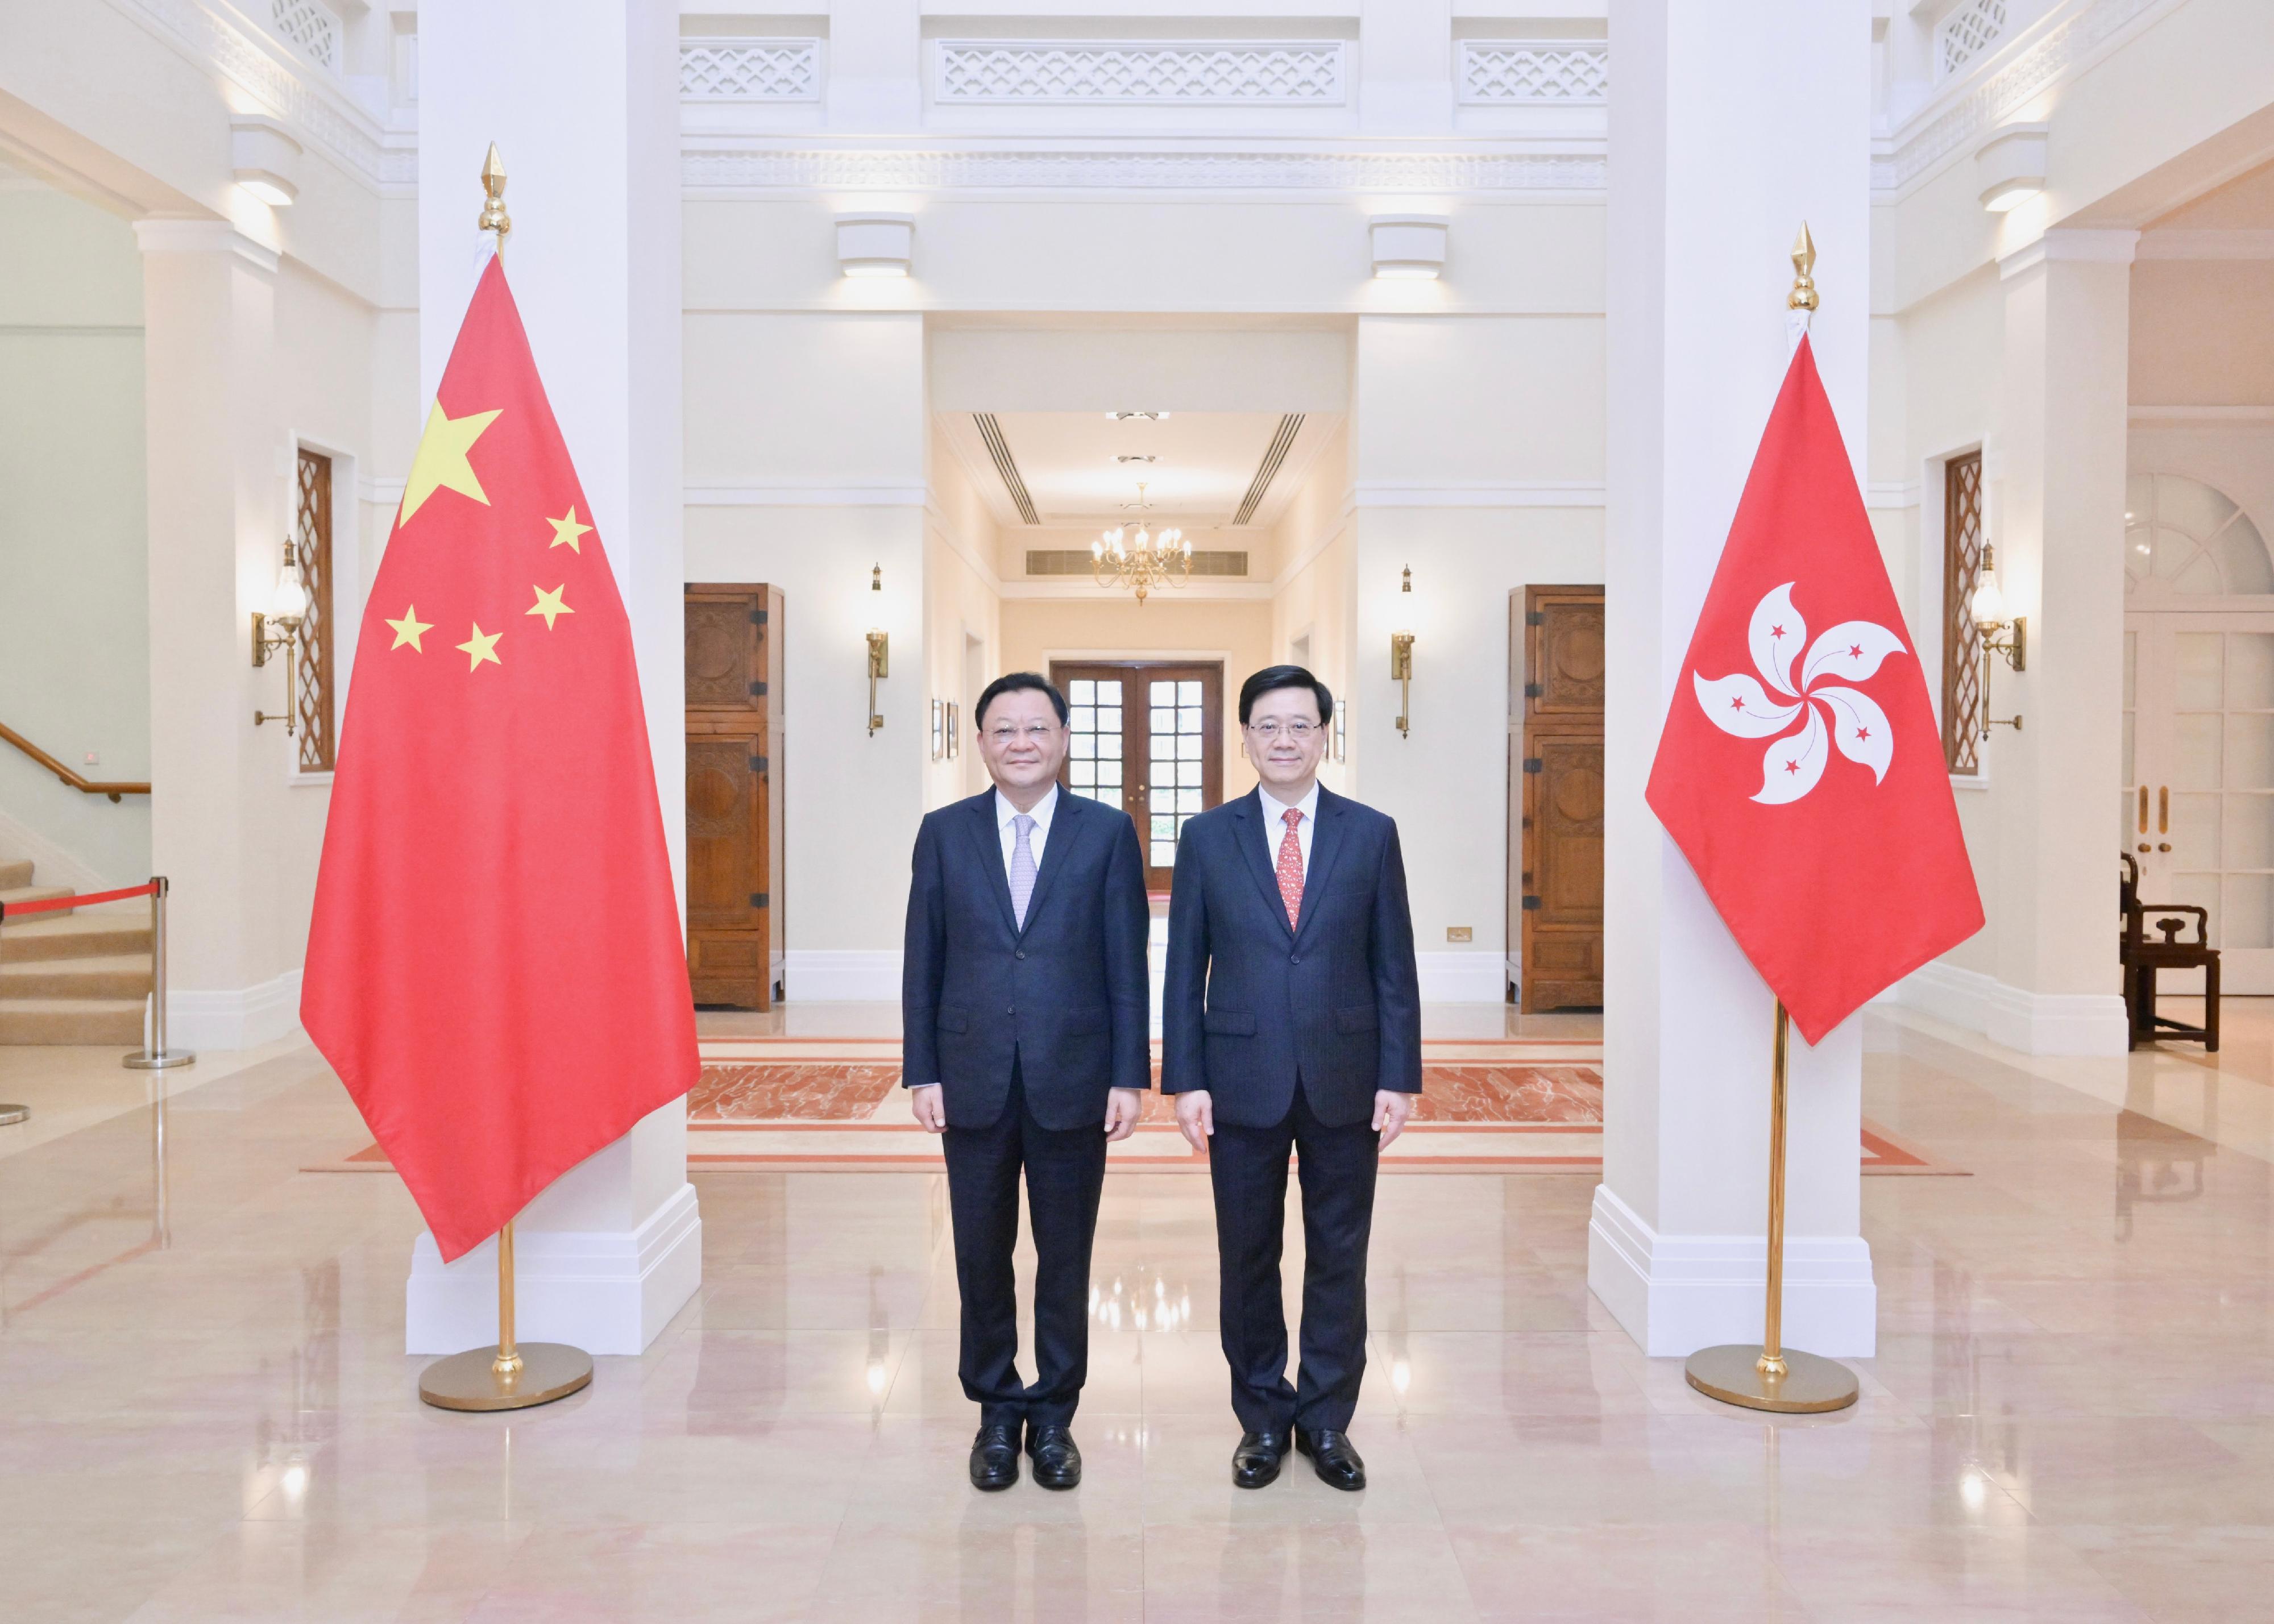 The Chief Executive, Mr John Lee, hosted a lunch at Government House for the visiting delegation of Guangdong Province attending the 23rd Plenary of Hong Kong/Guangdong Co-operation Joint Conference today (March 21). Photo shows Mr Lee (right) and the Governor of Guangdong Province, Mr Wang Weizhong (left), at Government House.